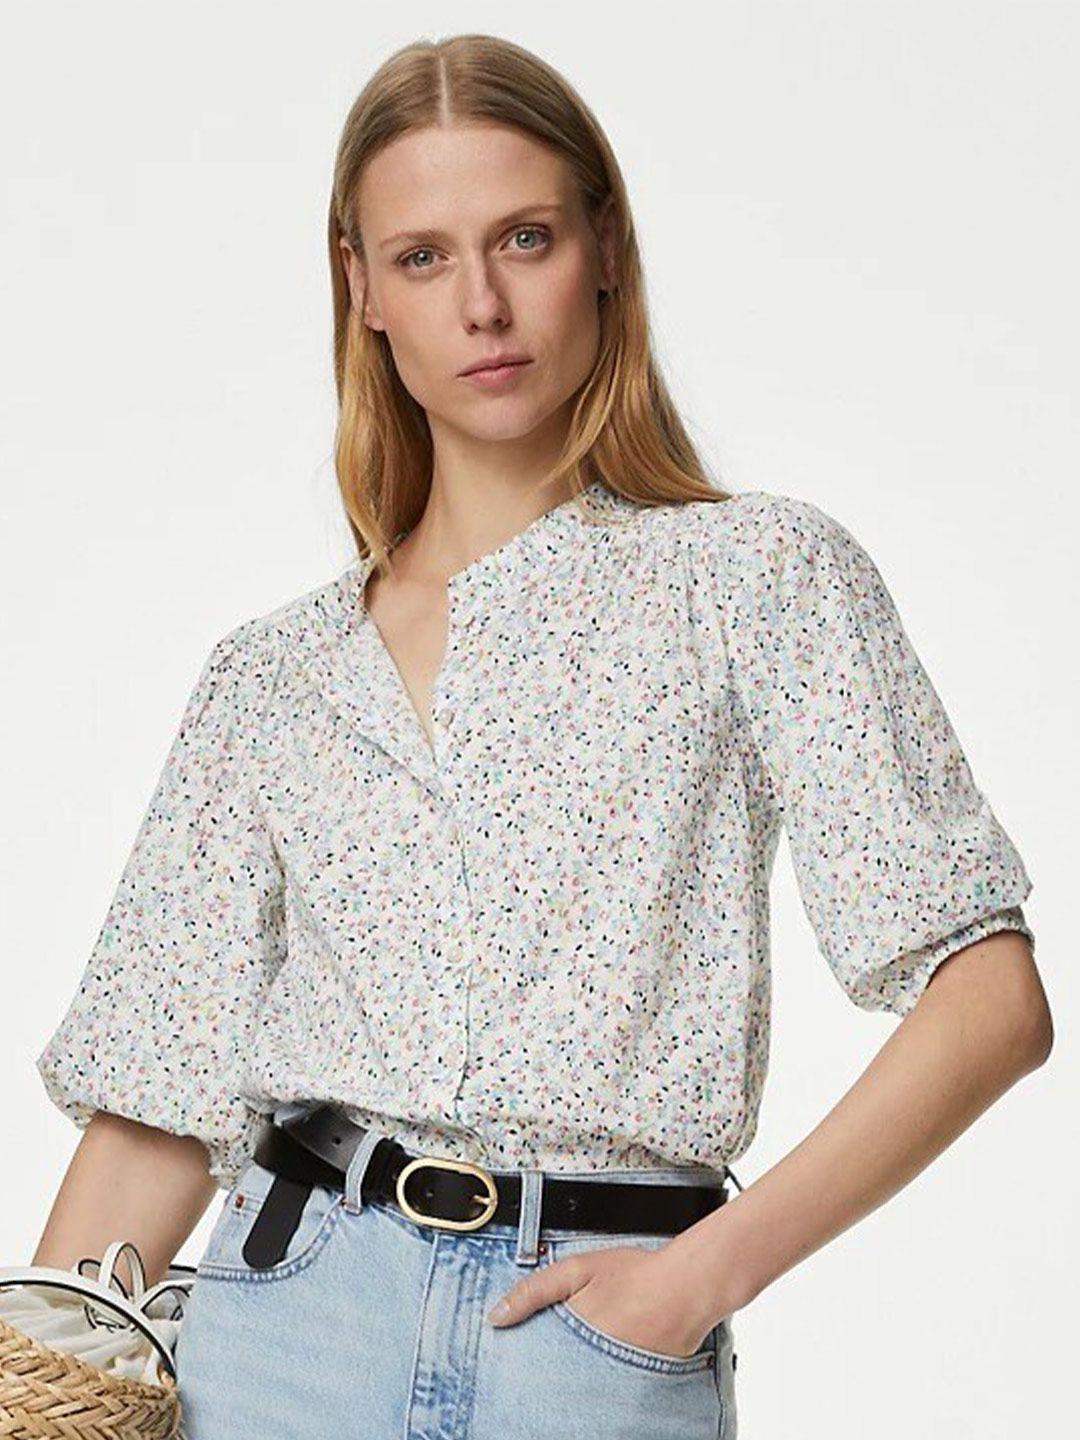 marks-&-spencer-floral-printed-puff-sleeve-pure-cotton-shirt-style-top